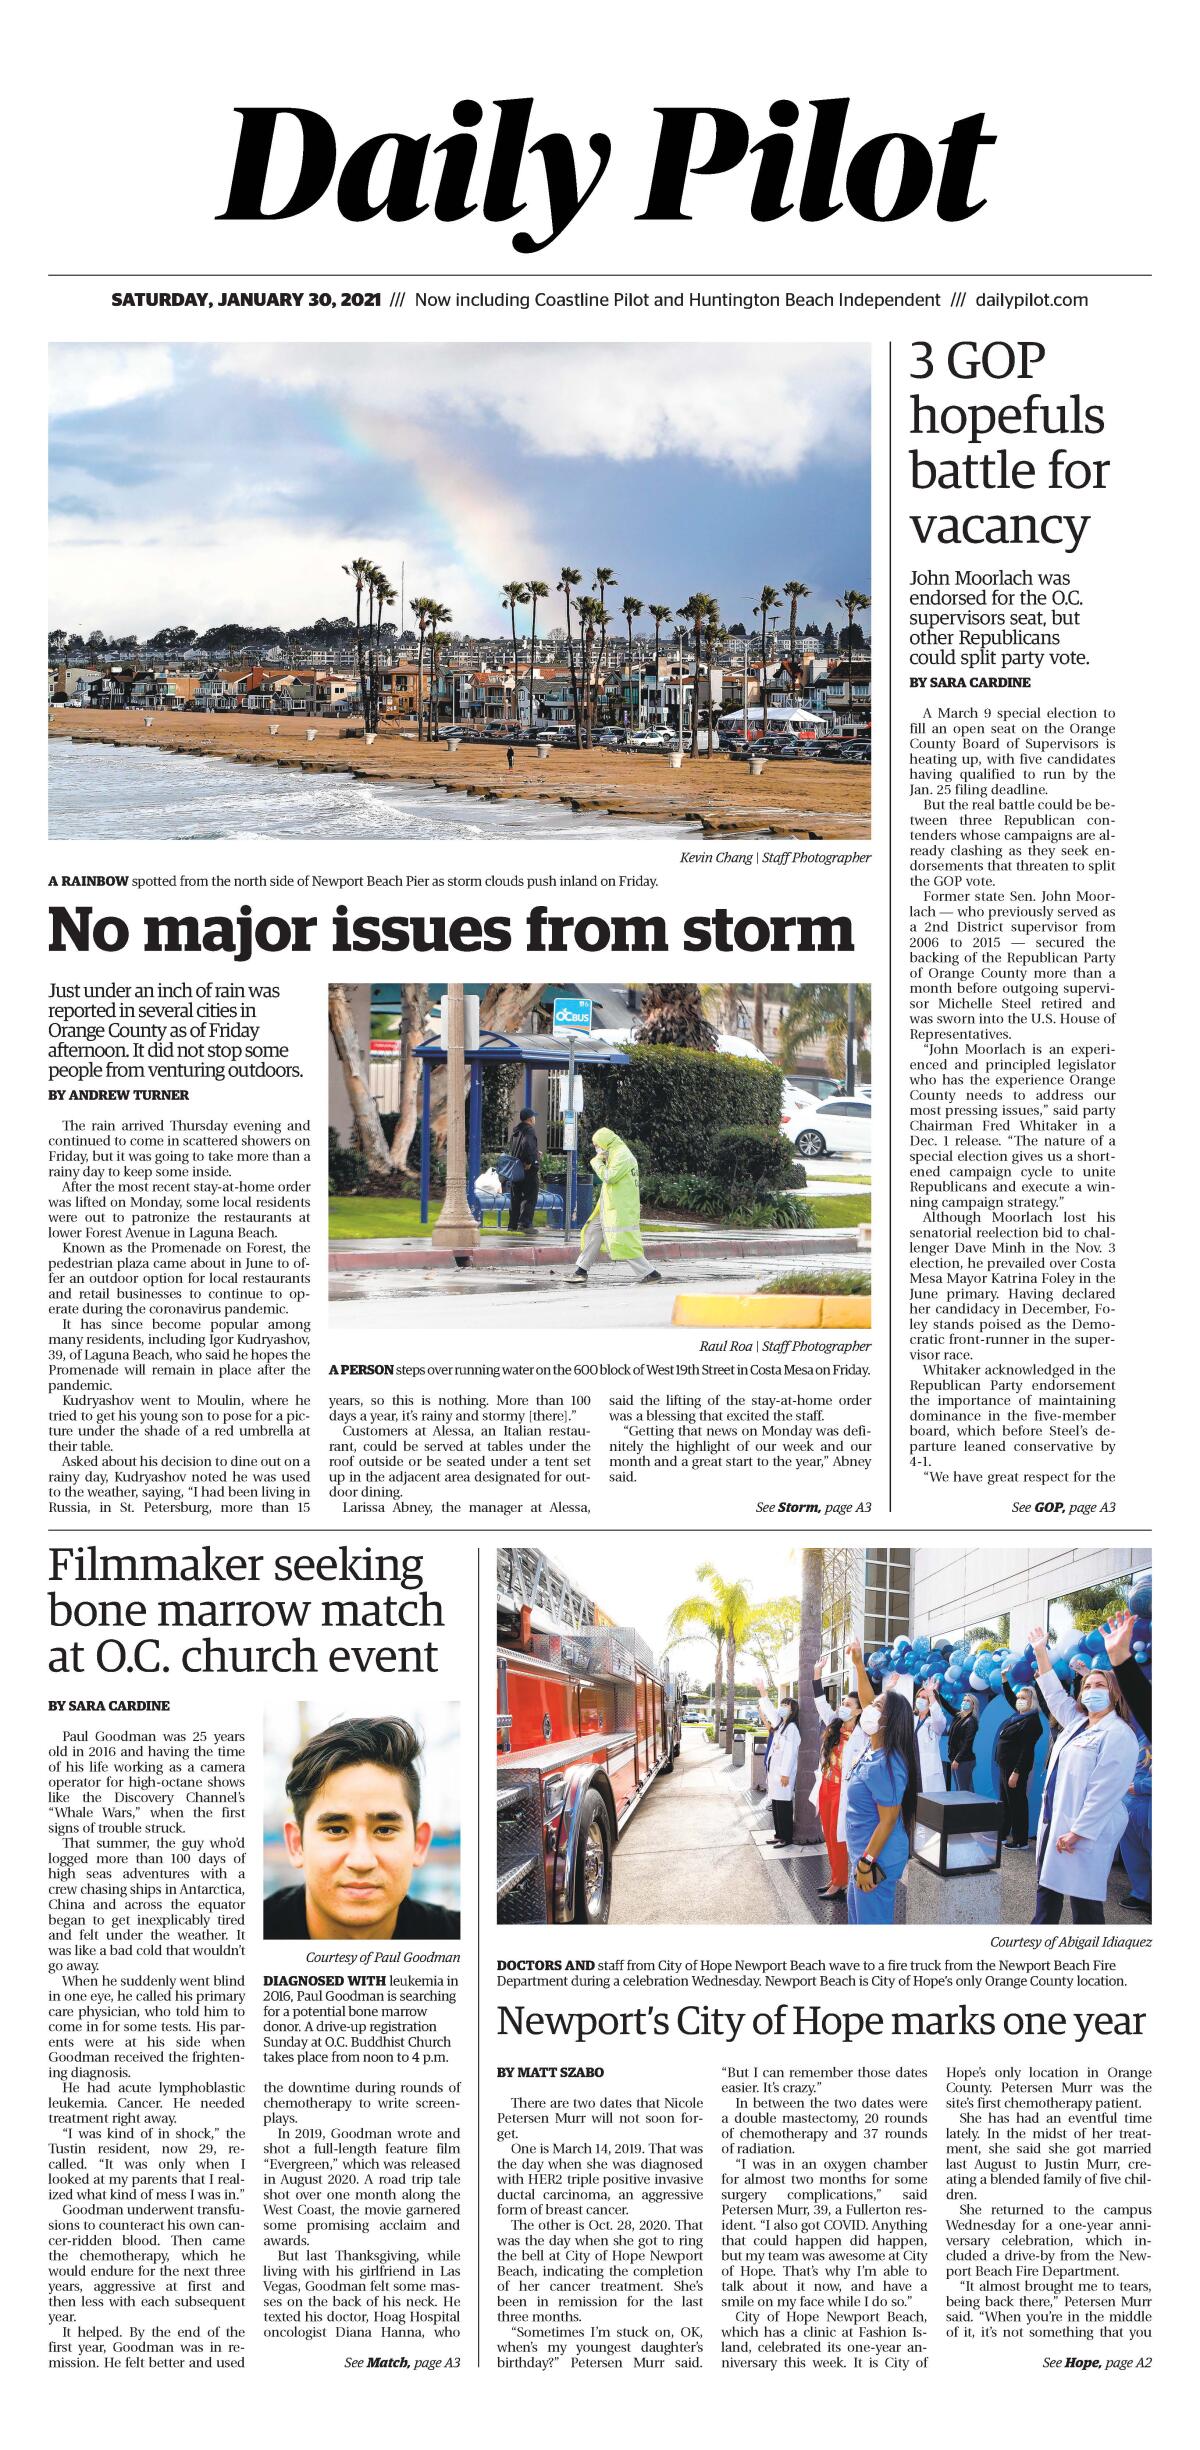 Front page of Daily Pilot e-newspaper for Saturday, Jan. 30, 2021.